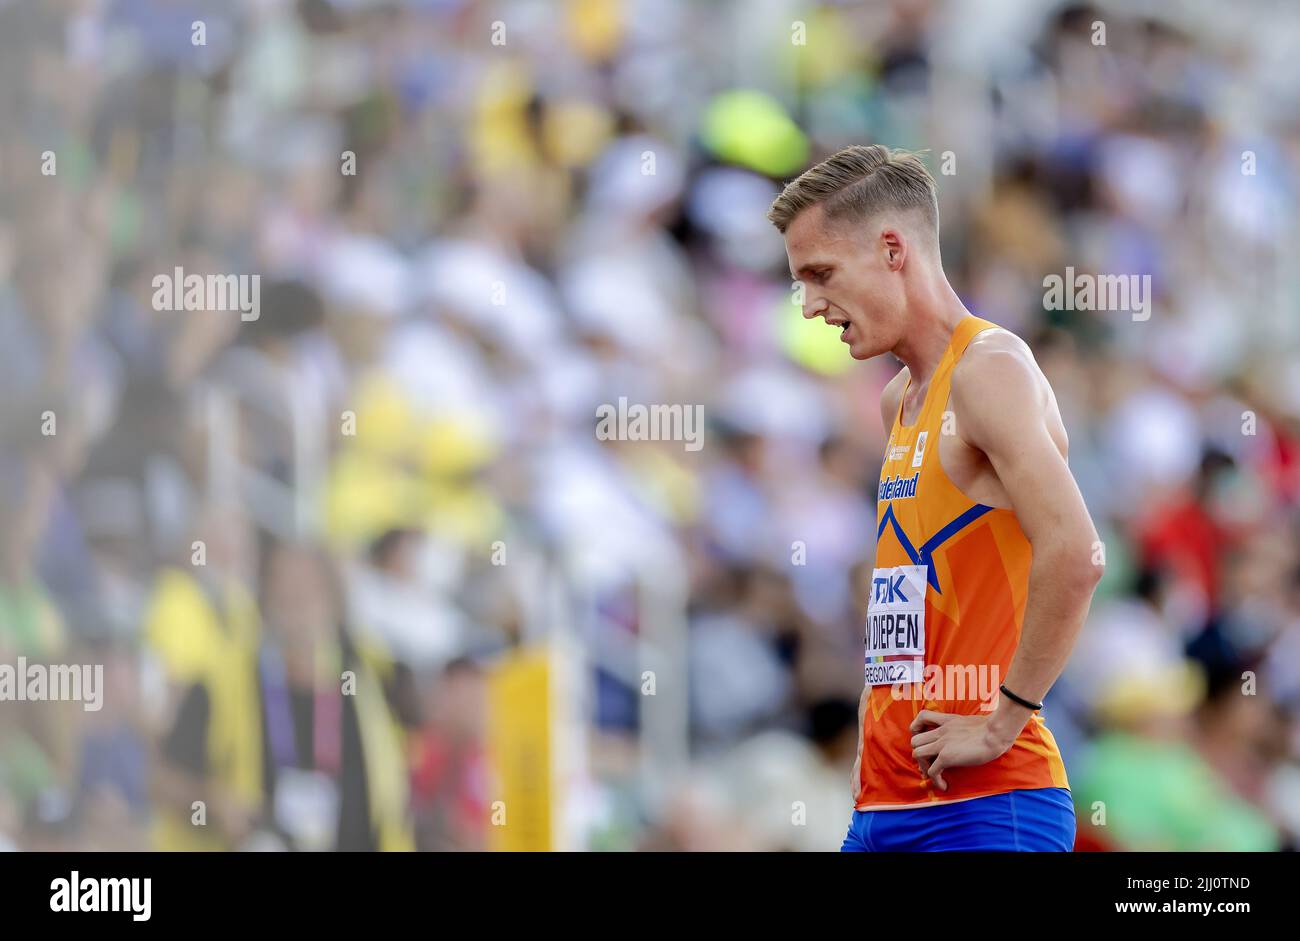 2022-07-22 04:02:54 EUGENE - Tony van Diepen in action during the semifinal of the 800 meters on the seventh day of the World Athletics Championships at the Hayward Field stadium. ANP ROBIN VAN LONKHUIJSEN netherlands out - belgium out Stock Photo